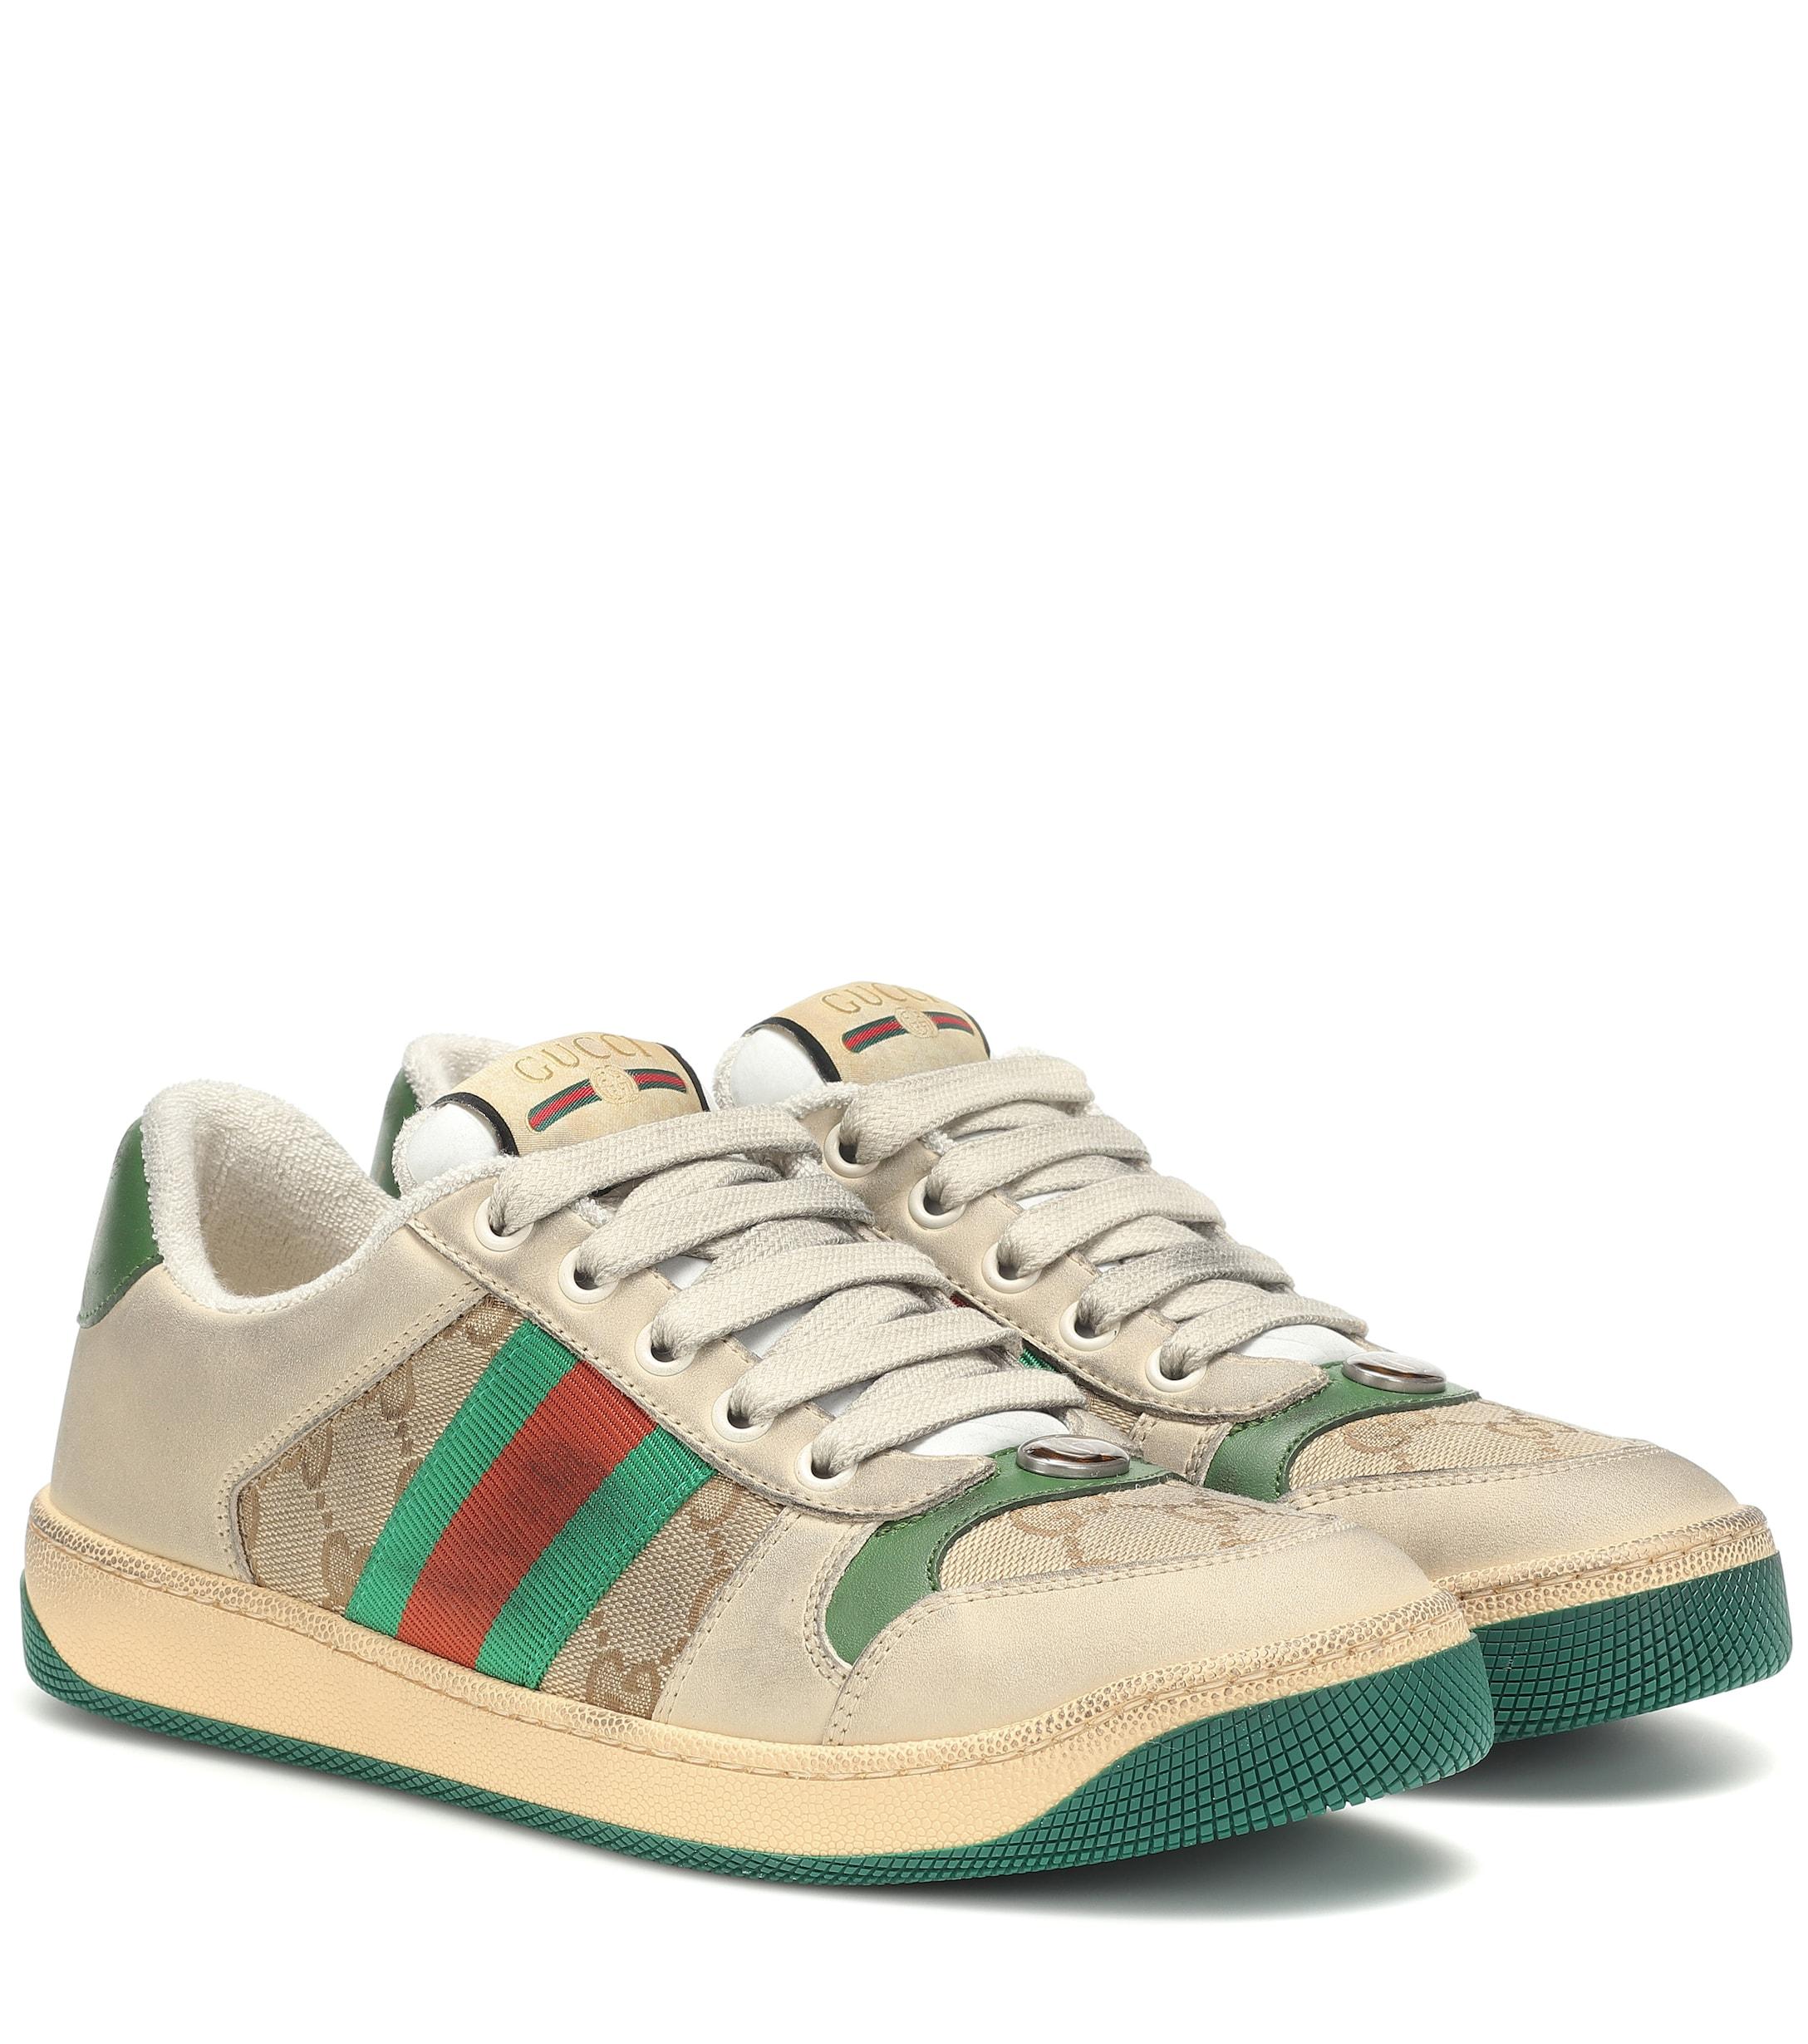 Gucci Screener Leather Sneakers in Beige (Natural) - Lyst